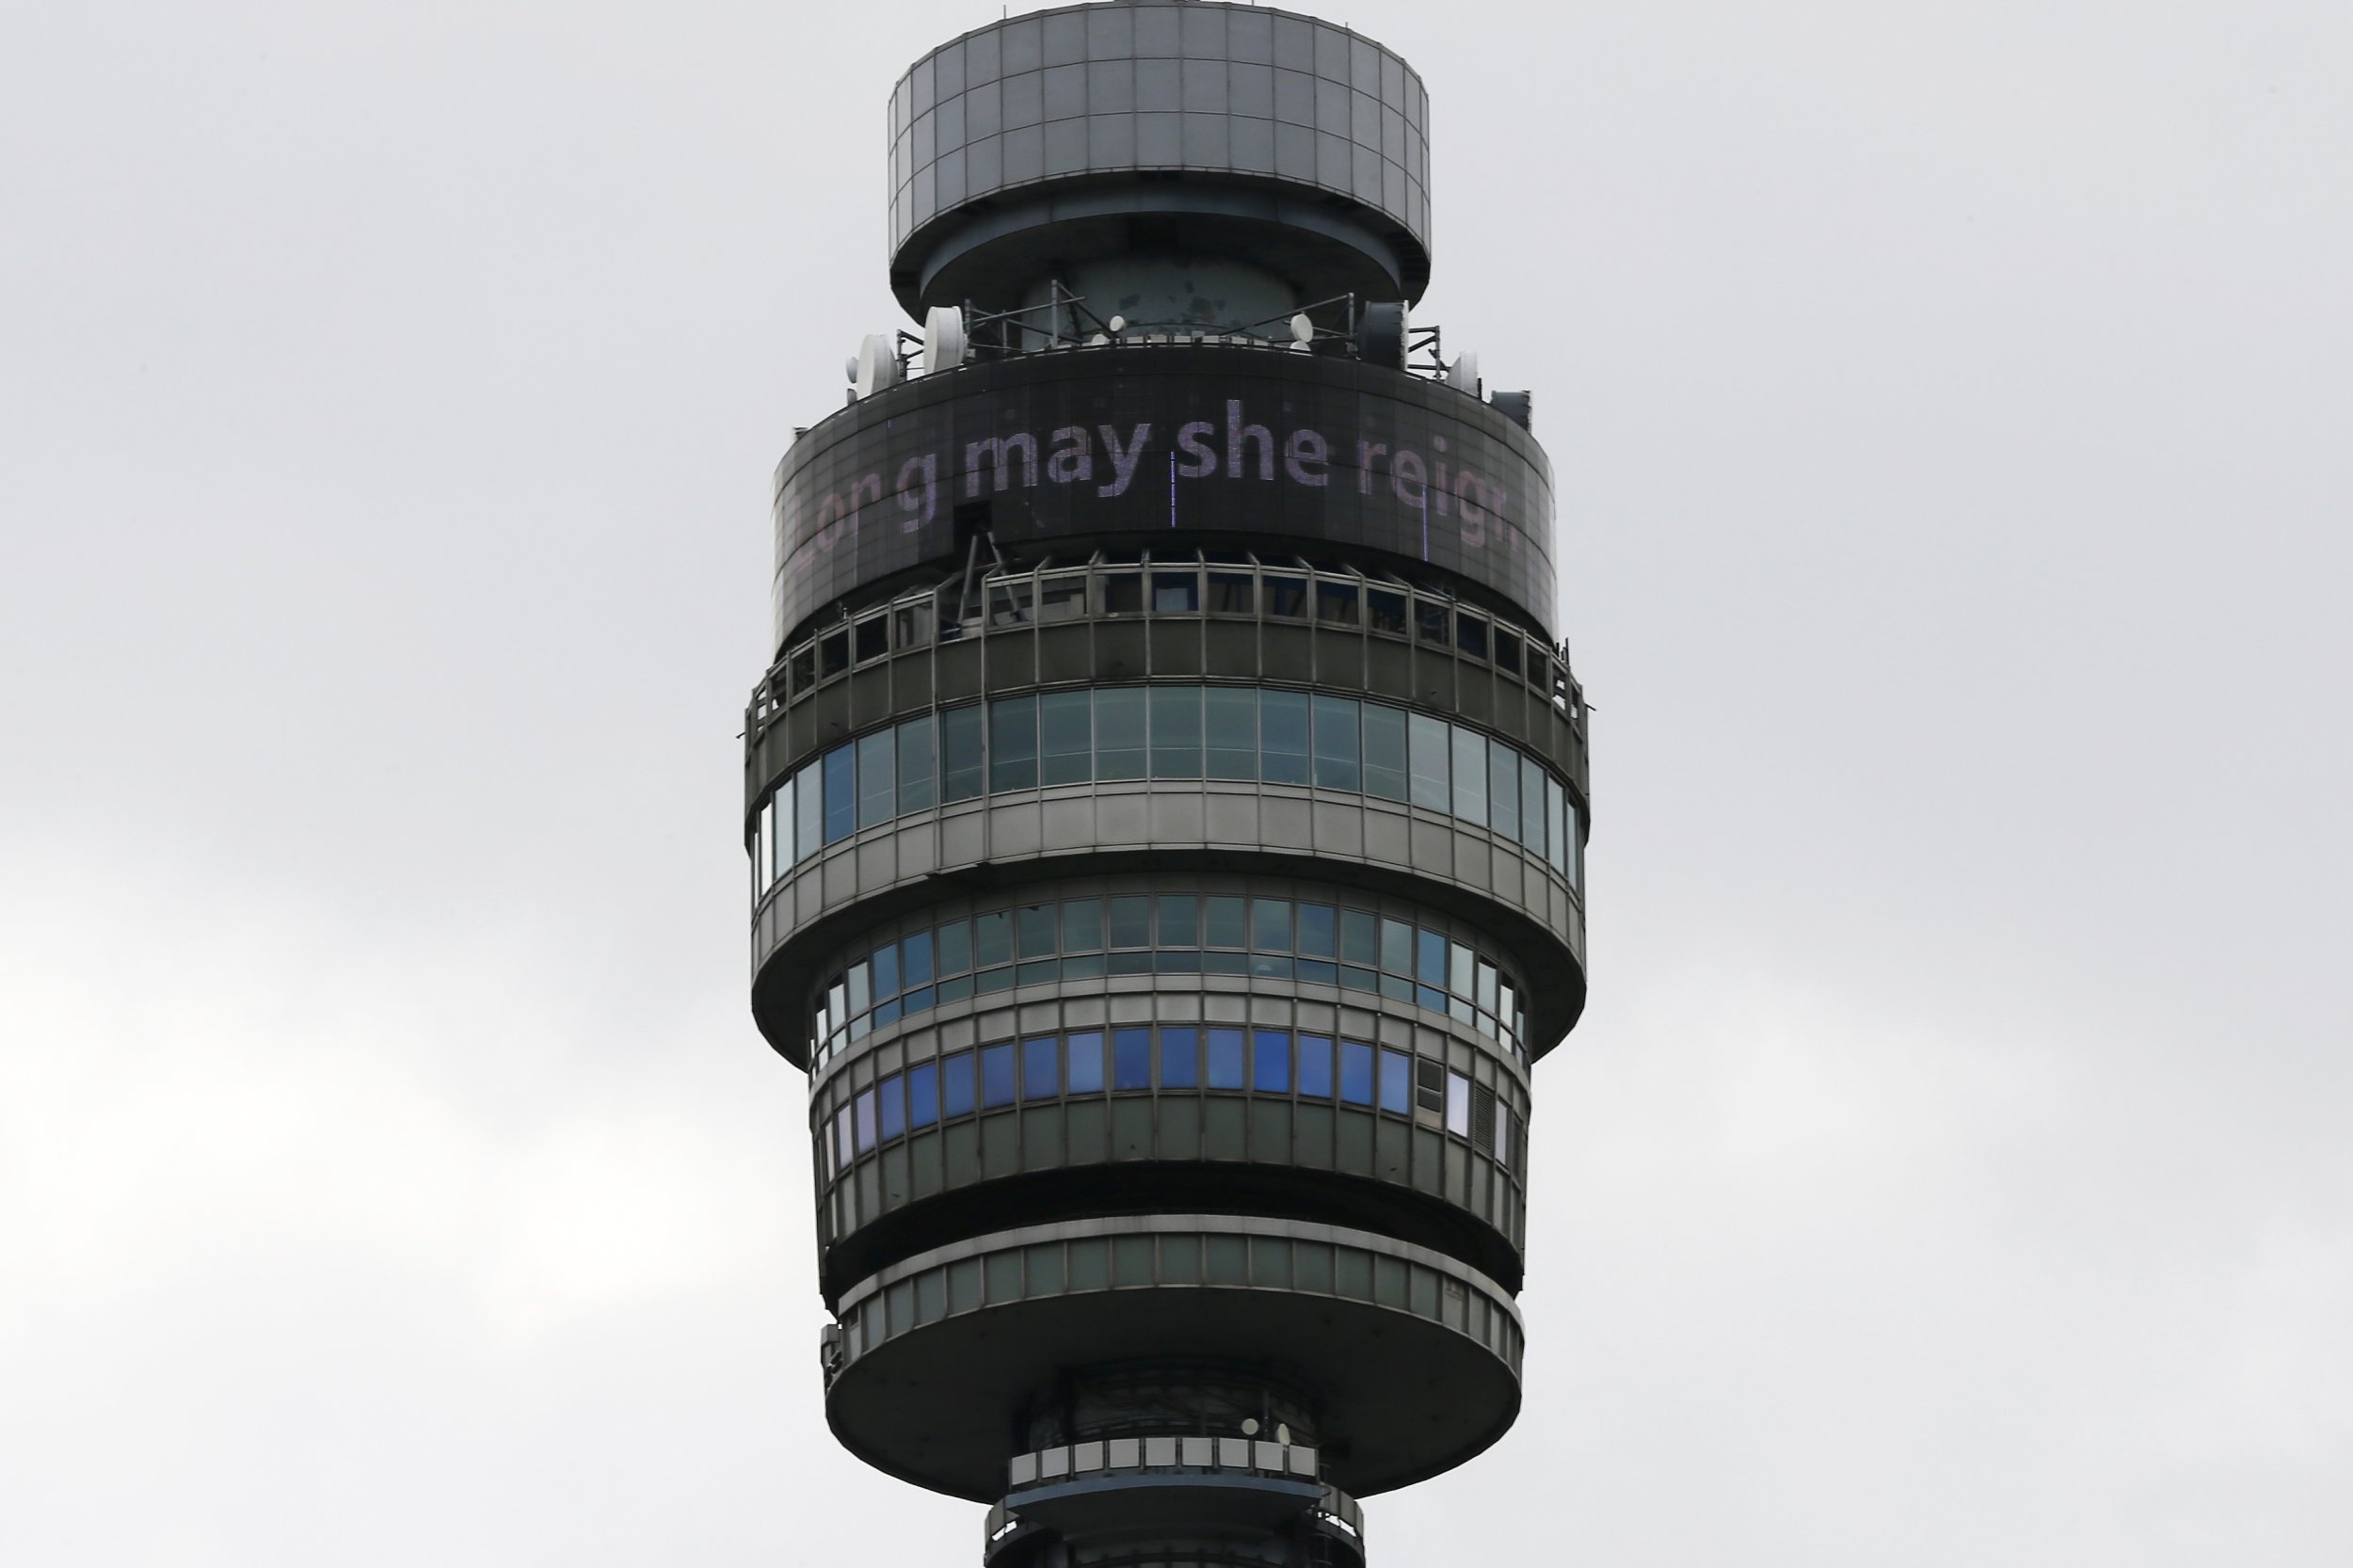 1301 The British Telecom tower displays Long may she reign to celebrate Queen Elizabeth becoming the longest-reigning British monarch